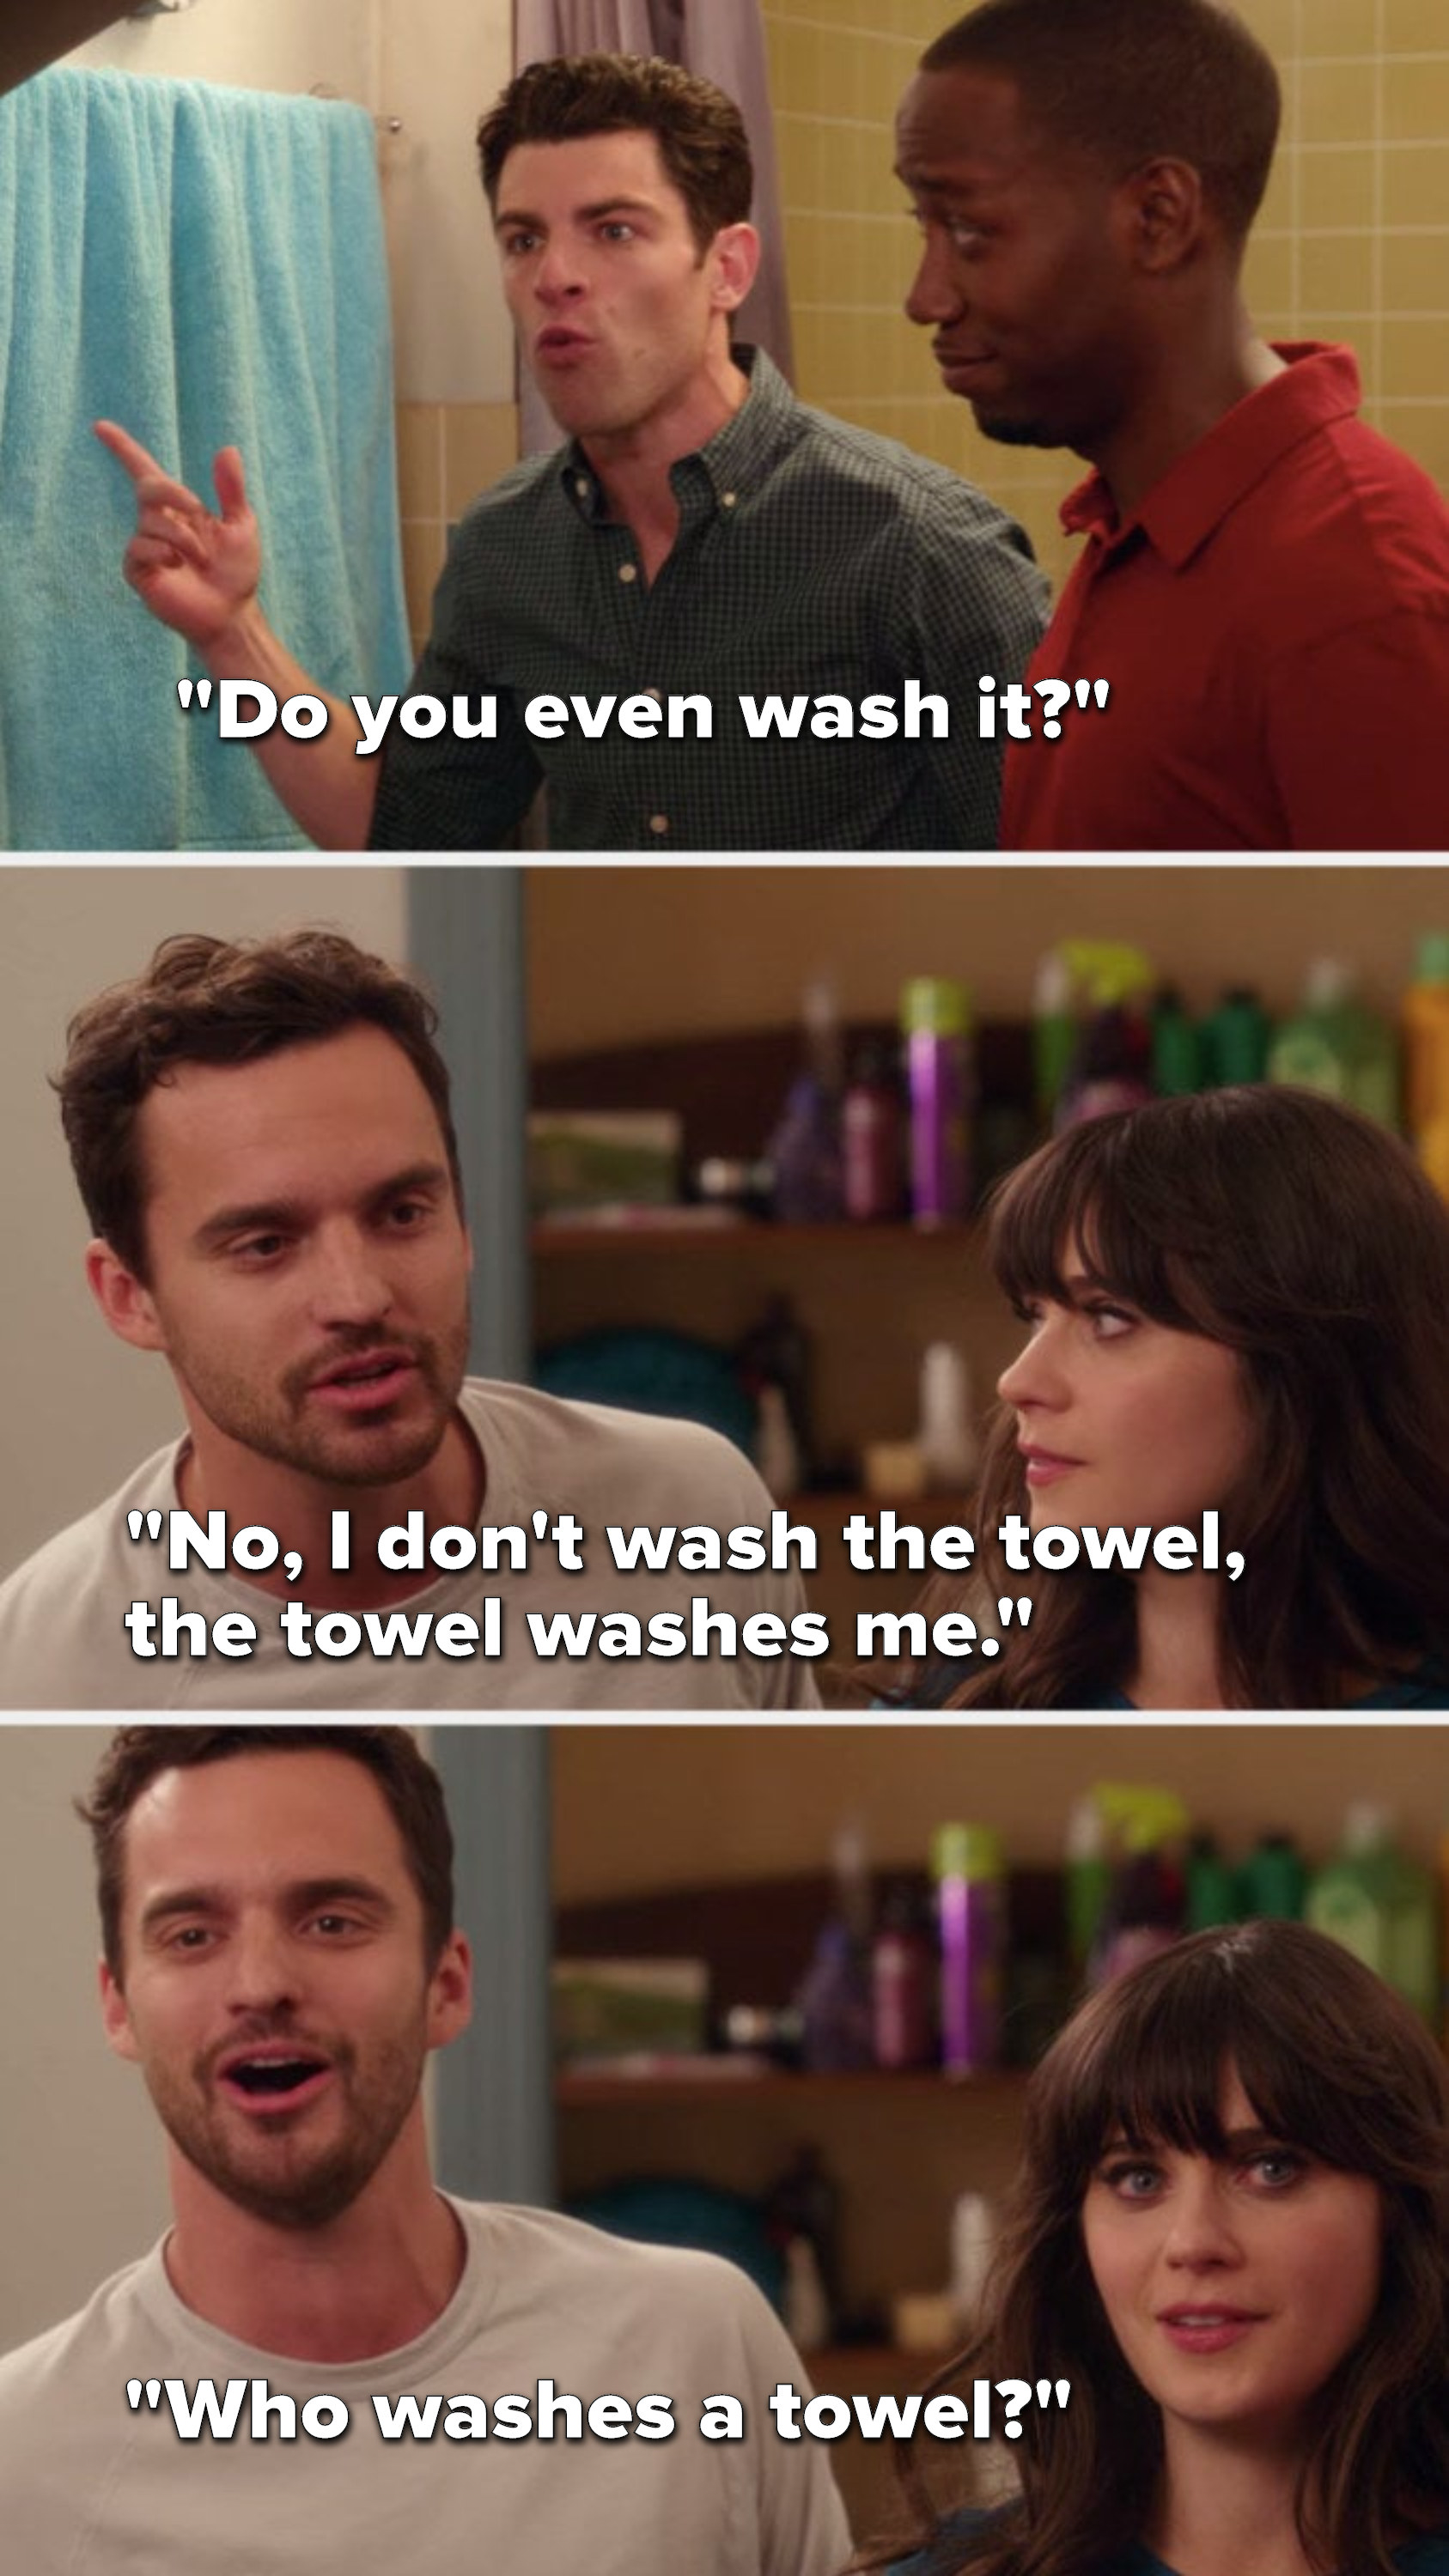 Schmidt says, &quot;Do you even wash it&quot; and Nick says, &quot;No, I don&#x27;t wash the towel, the towel washes me, who washes a towel&quot;